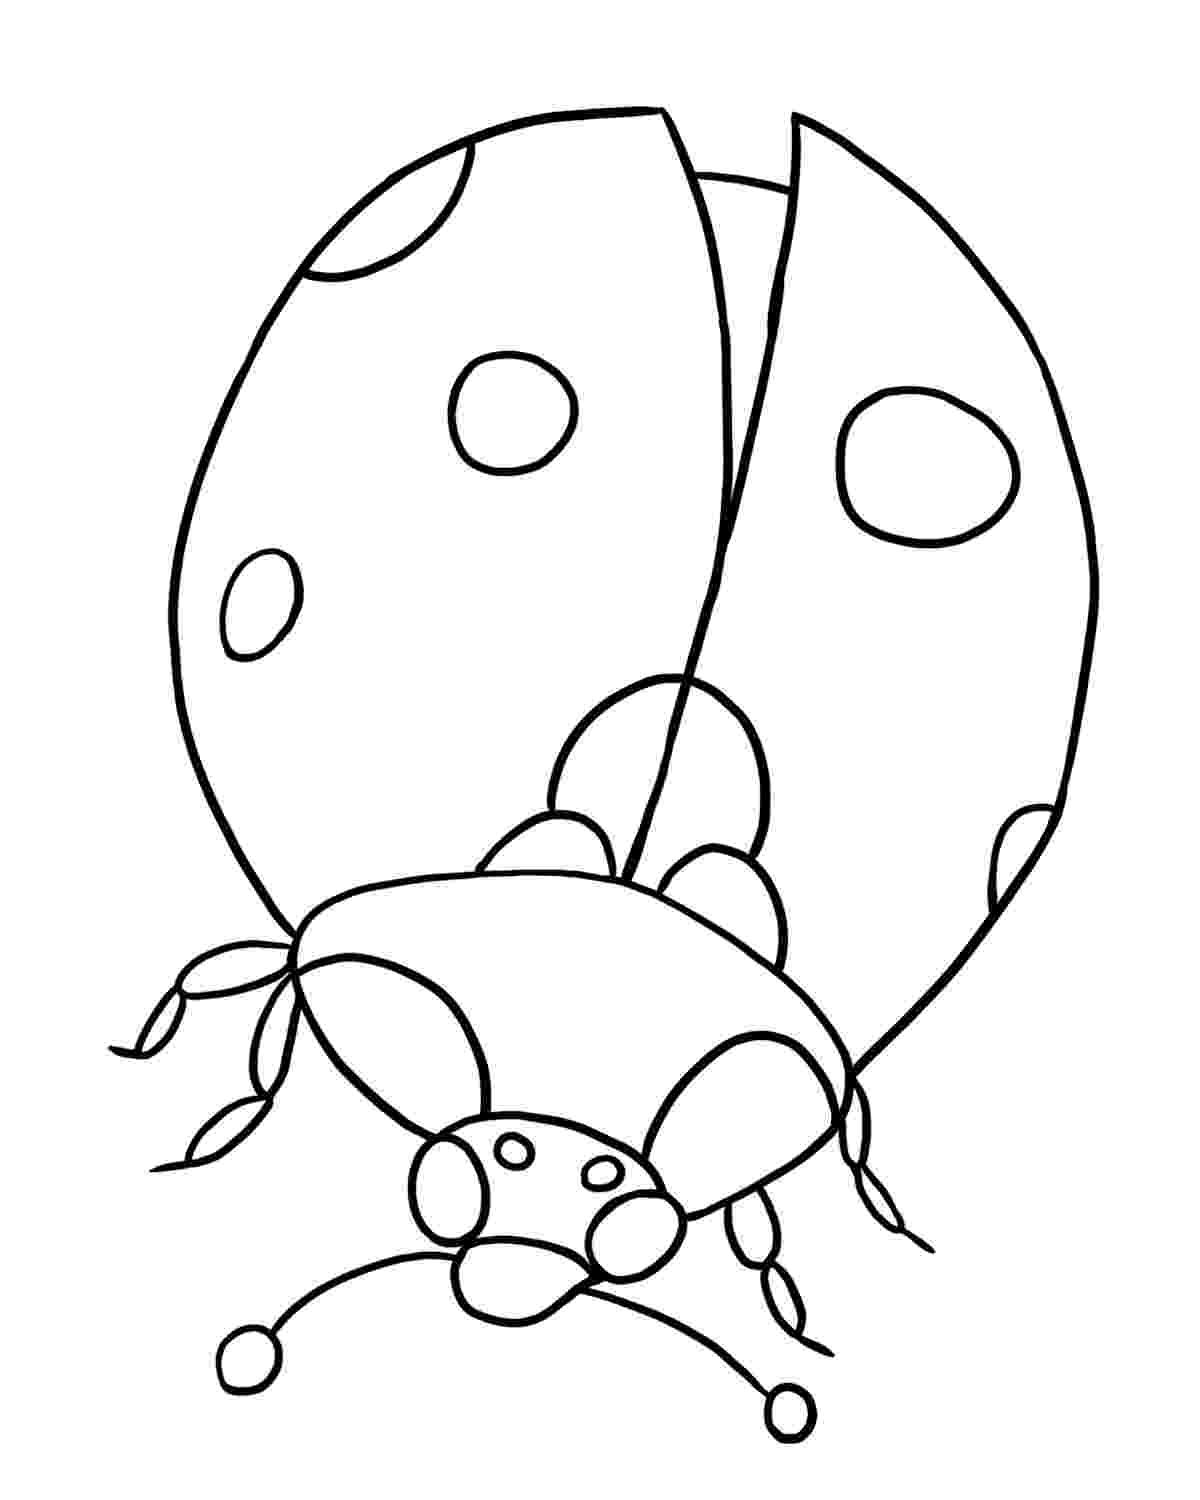 bug coloring page printable bug coloring pages for kids cool2bkids bug page coloring 